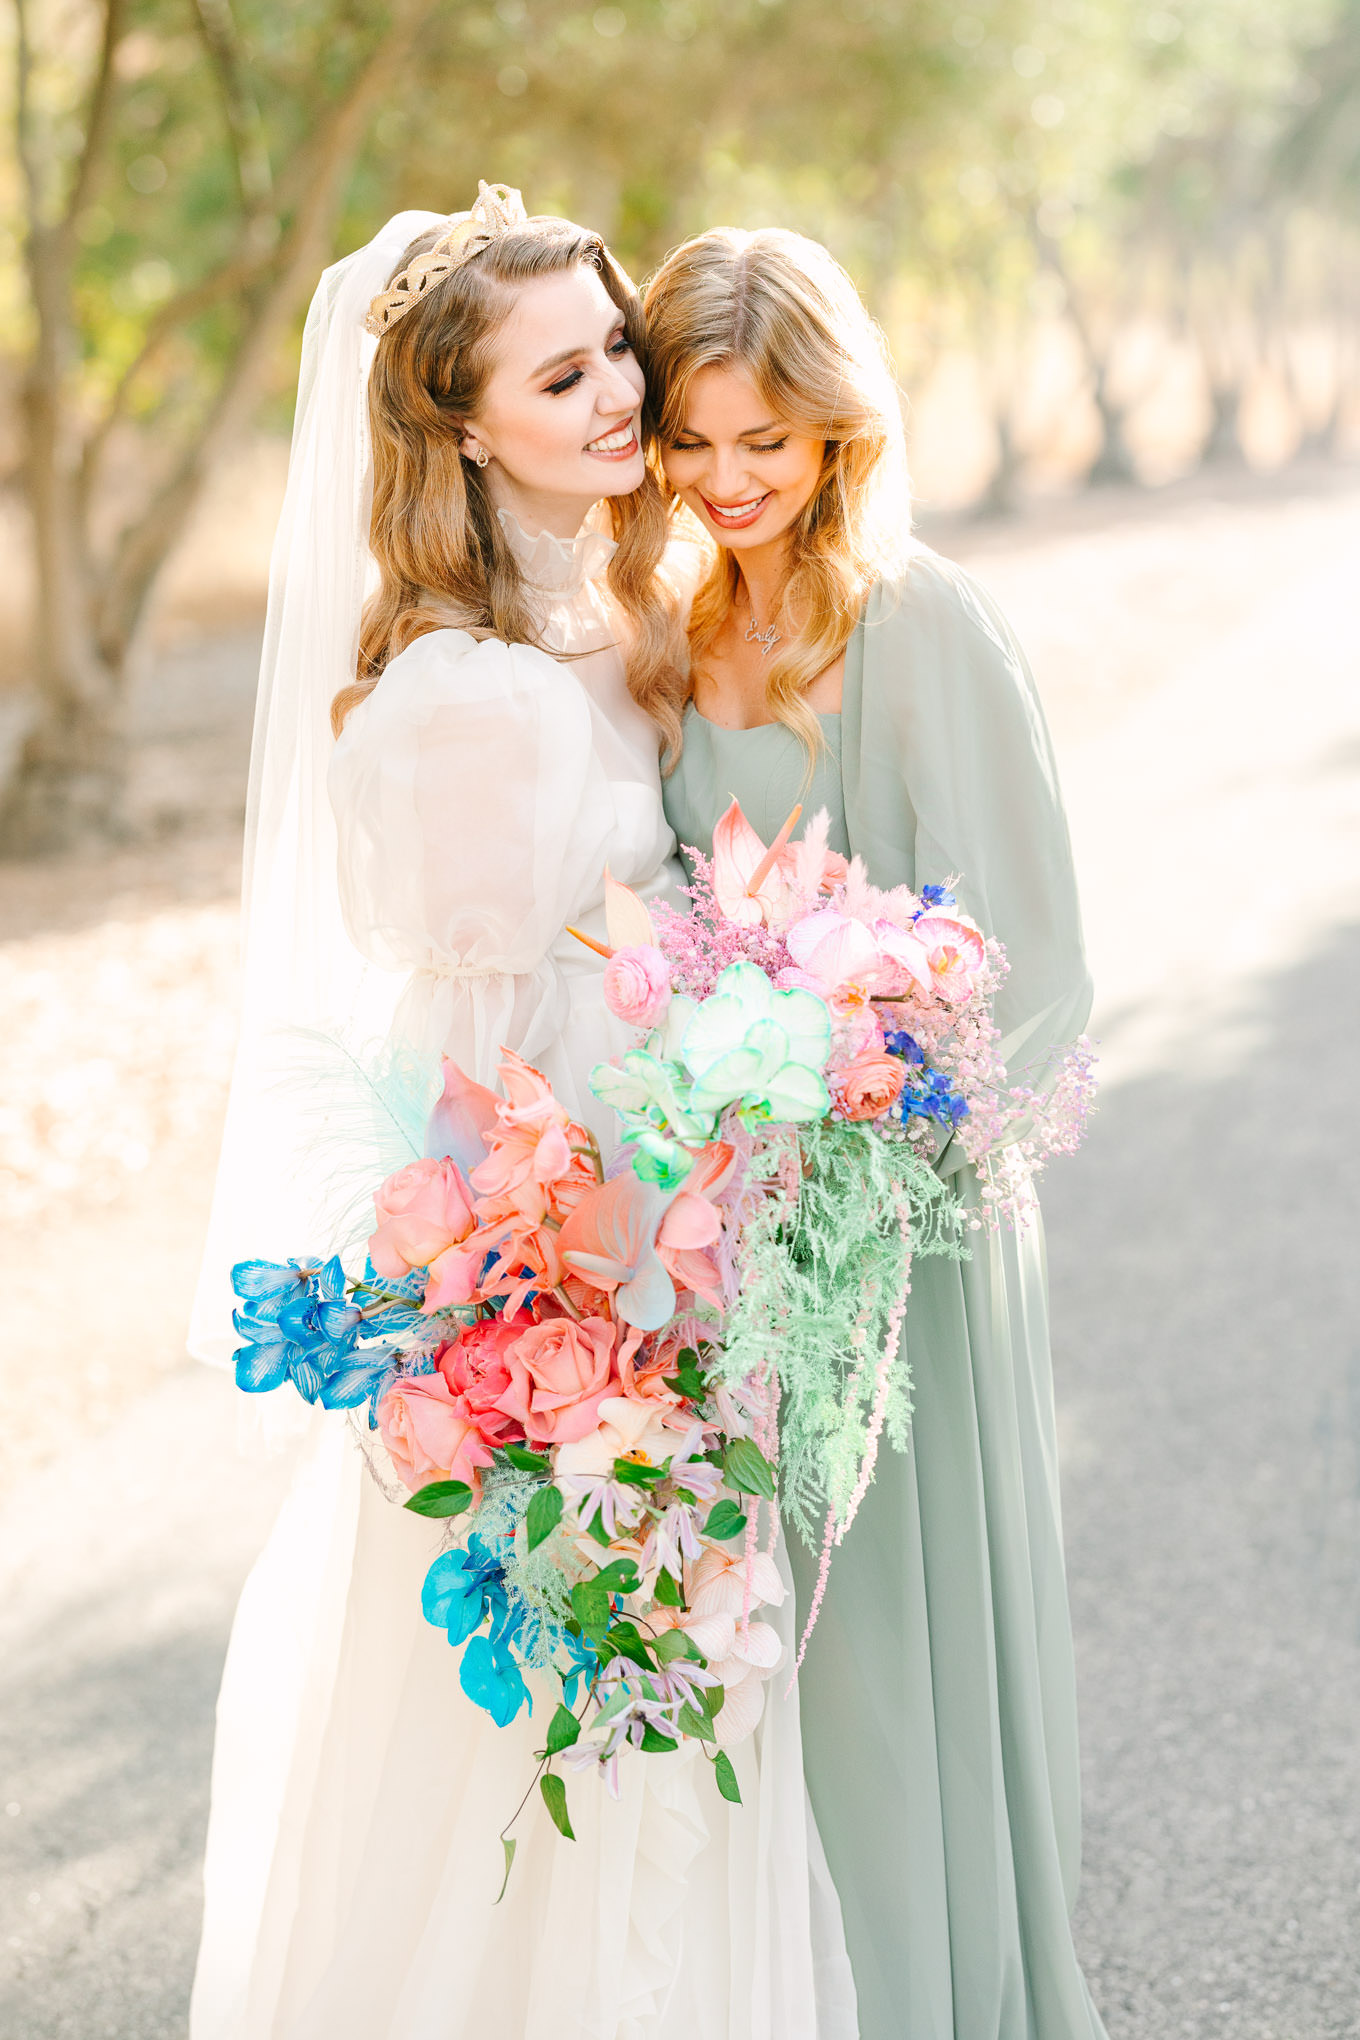 Bride Allison Harvard with sister | Colorful and quirky wedding at Higuera Ranch in San Luis Obispo | #sanluisobispowedding #californiawedding #higueraranch #madonnainn   
Source: Mary Costa Photography | Los Angeles